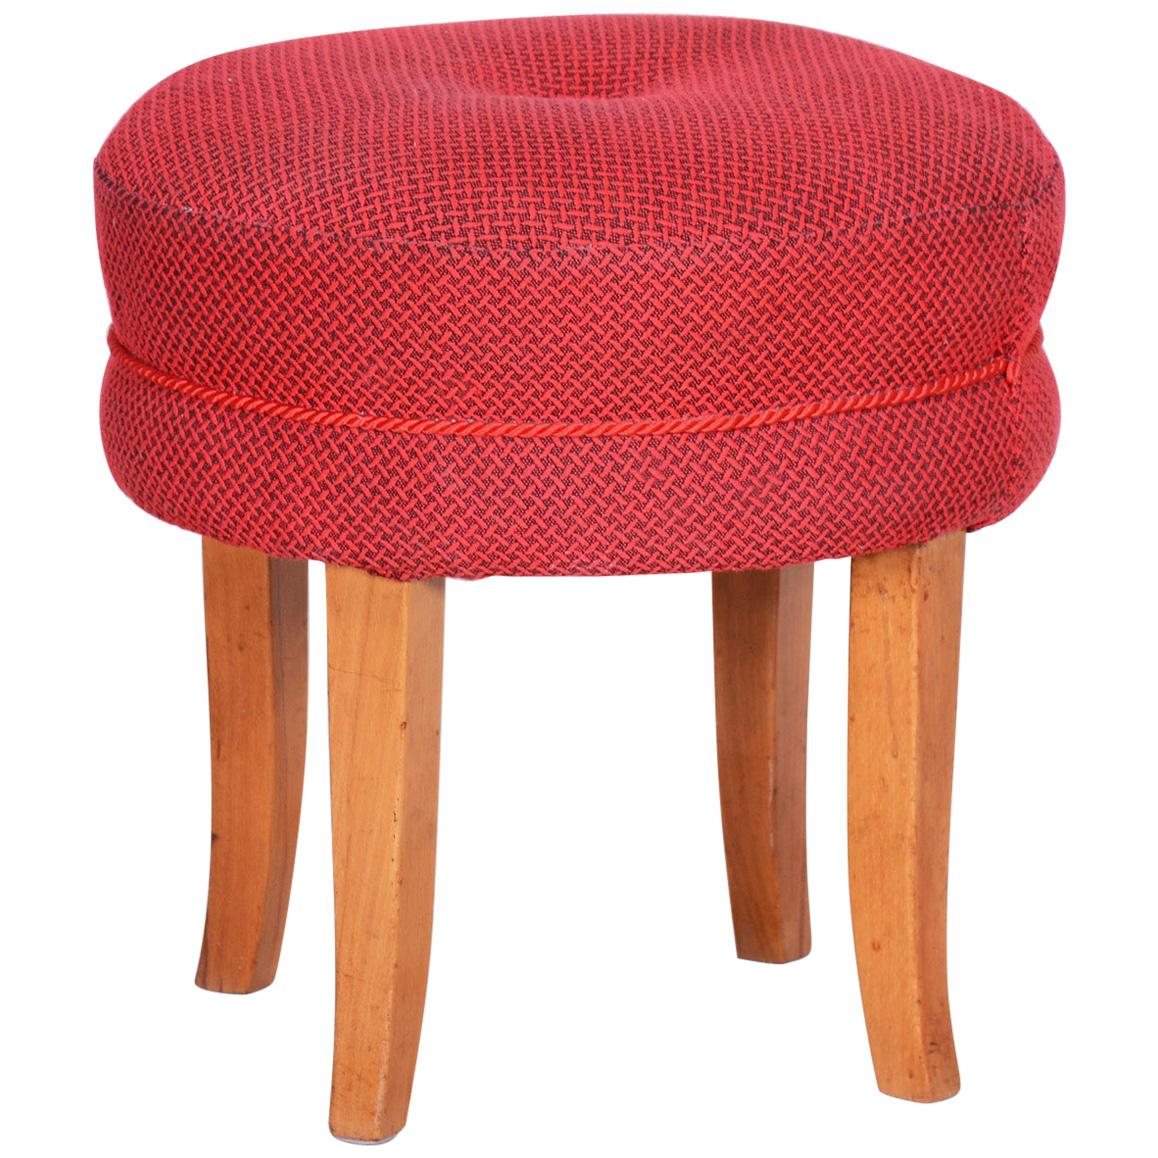 Czech Red Beech Midcentury Stool, Original Well Preserved Condition, 1950s For Sale